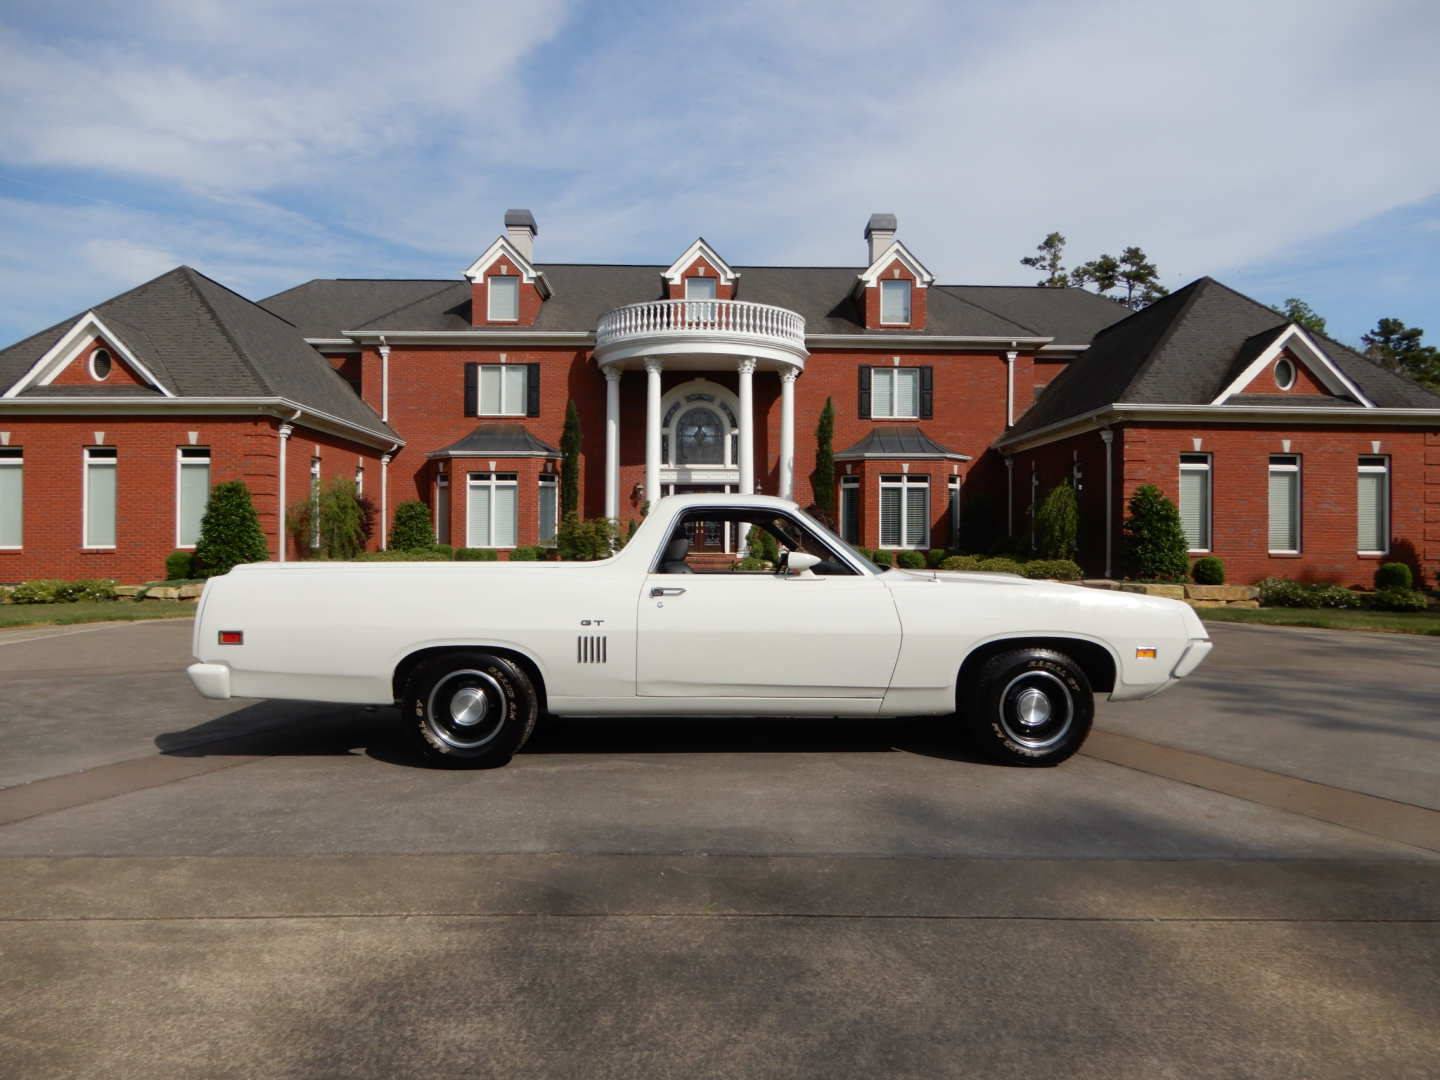 3rd Image of a 1970 FORD RANCHERO